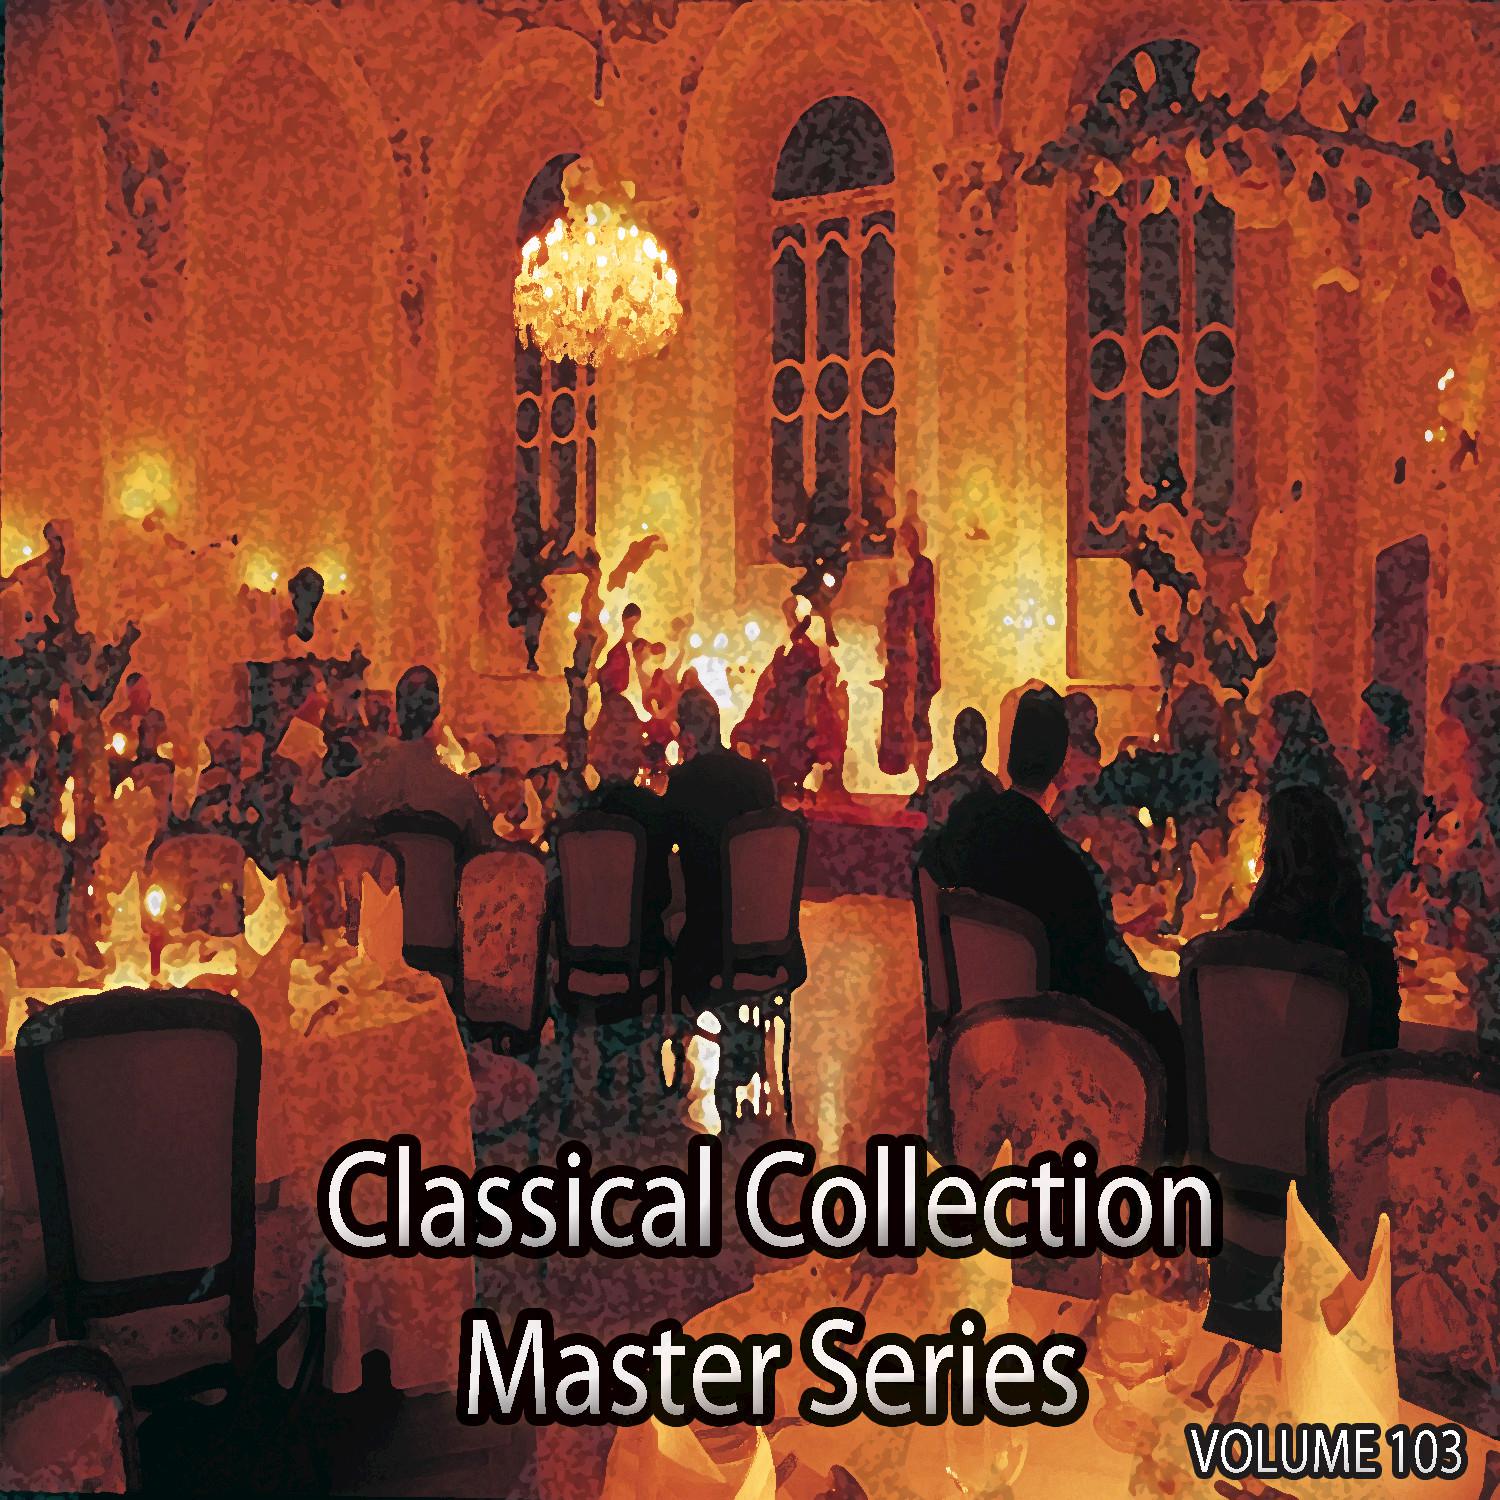 Classical Collection Master Series, Vol. 103